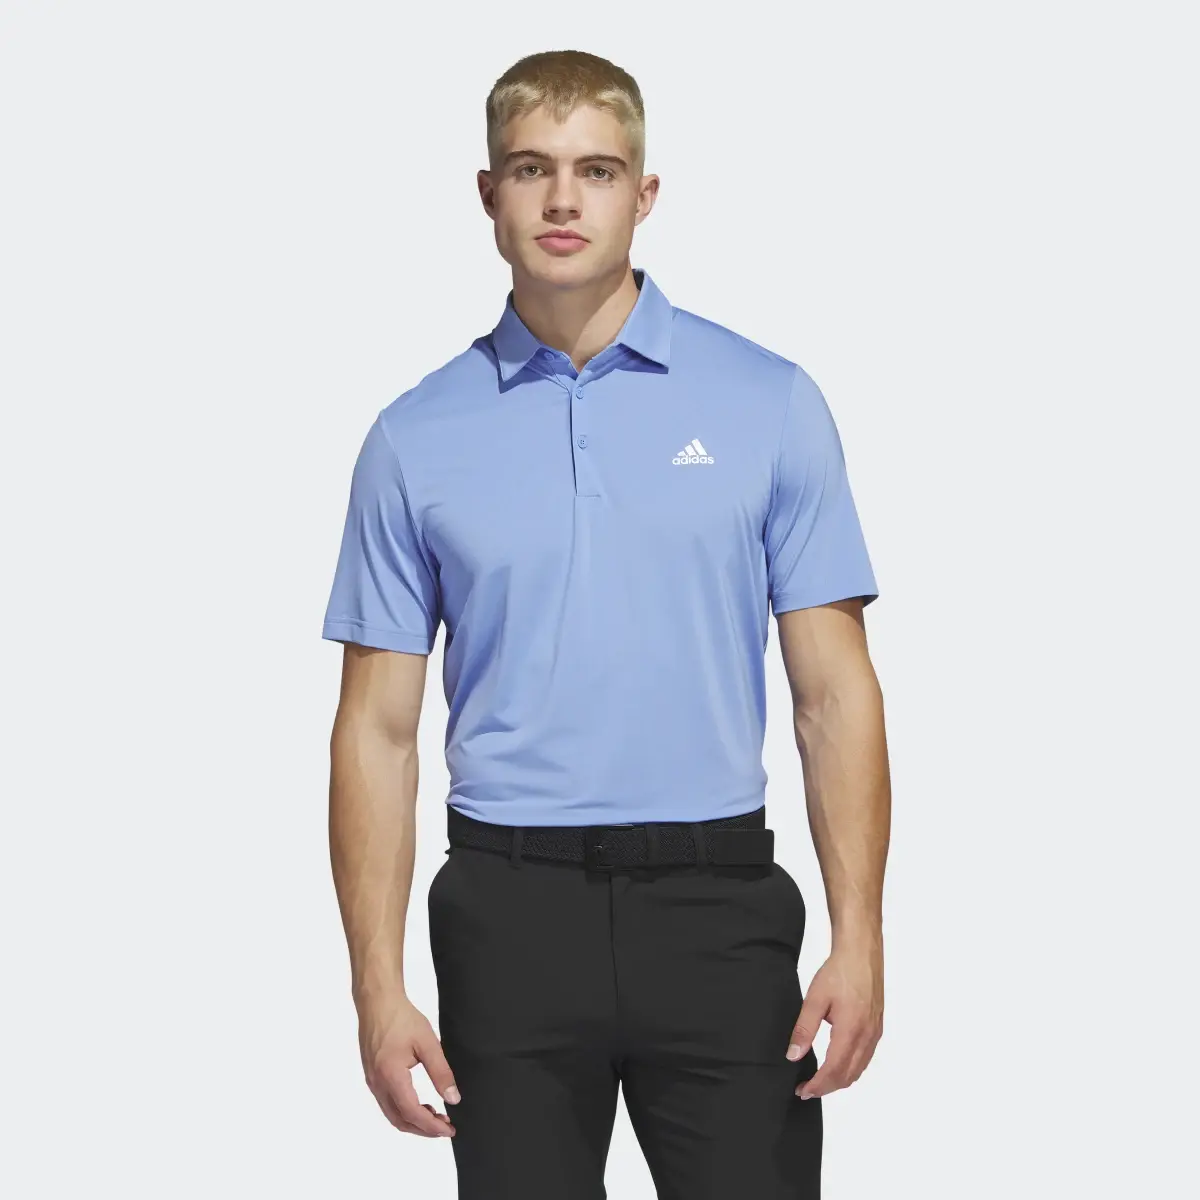 Adidas Ultimate365 Solid Left Chest Polo Shirt. 2